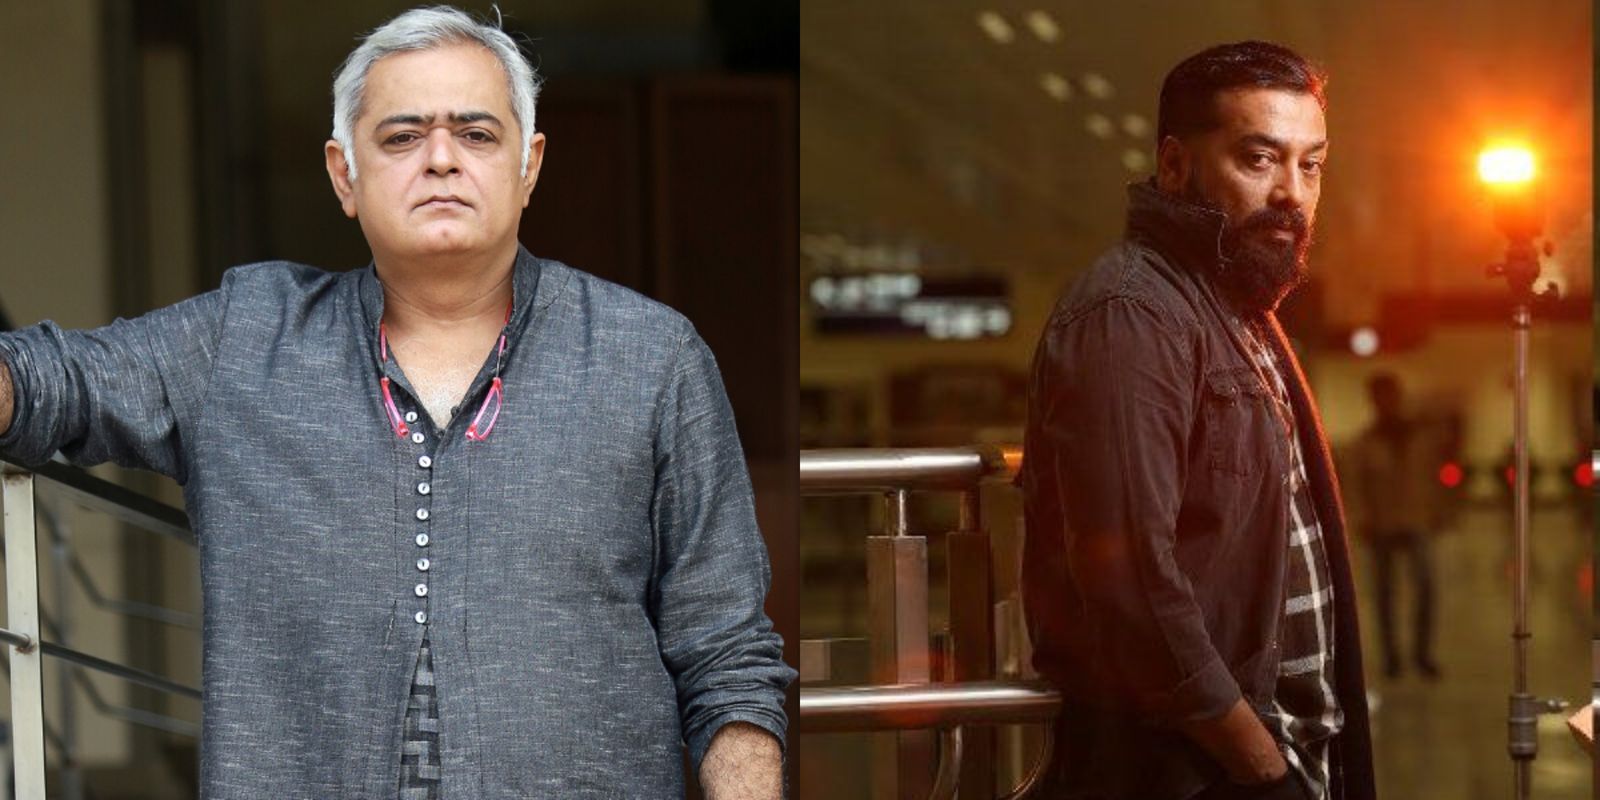 Hansal Mehta Pained By Me Too Allegations Against Anurag Kashyap, Questions The Timing Asks, 'Is This A Witch-Hunt Again?'